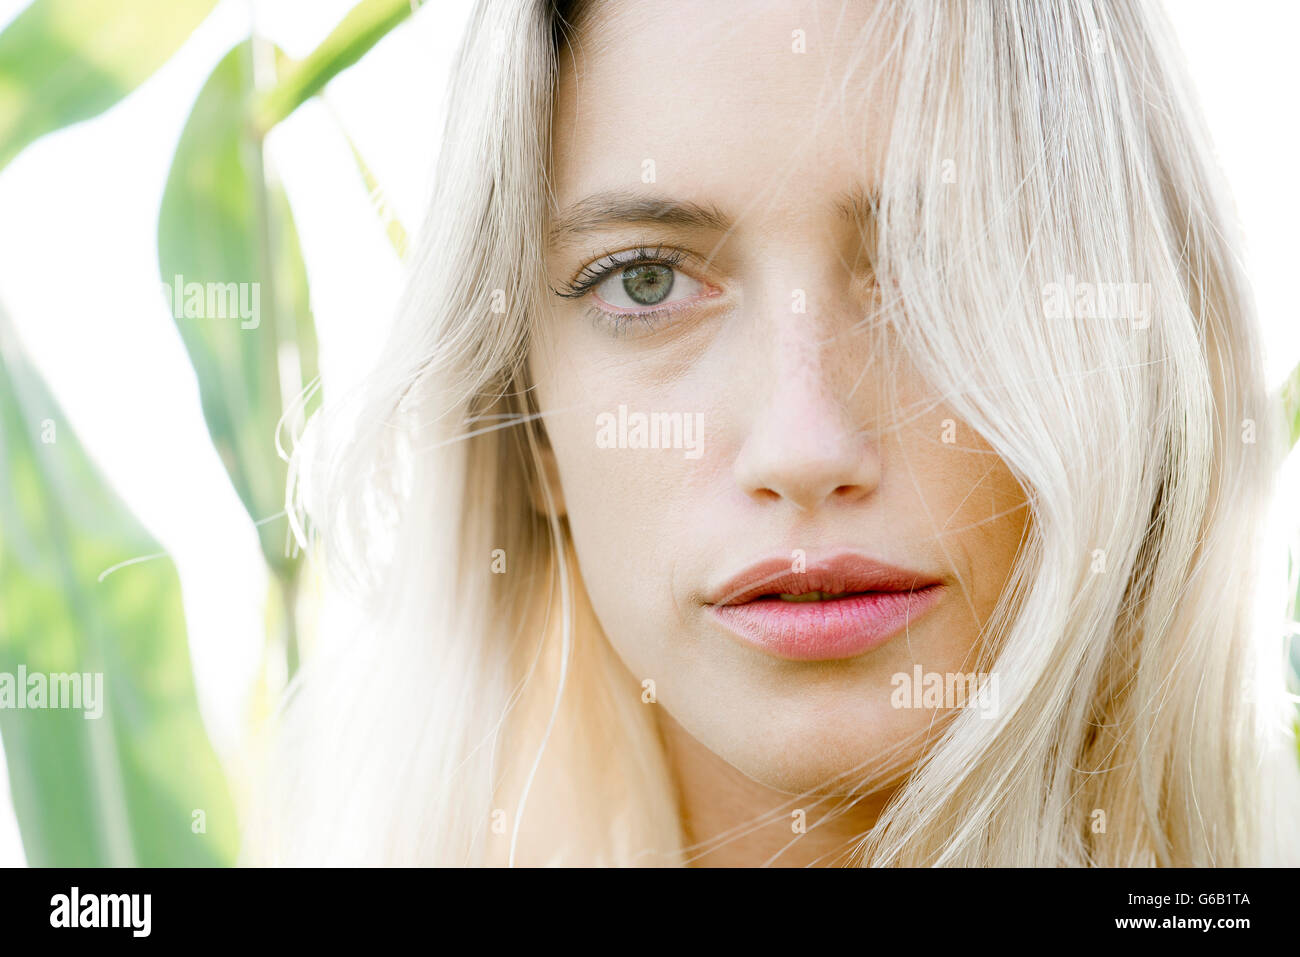 Young woman outdoors, portrait Stock Photo